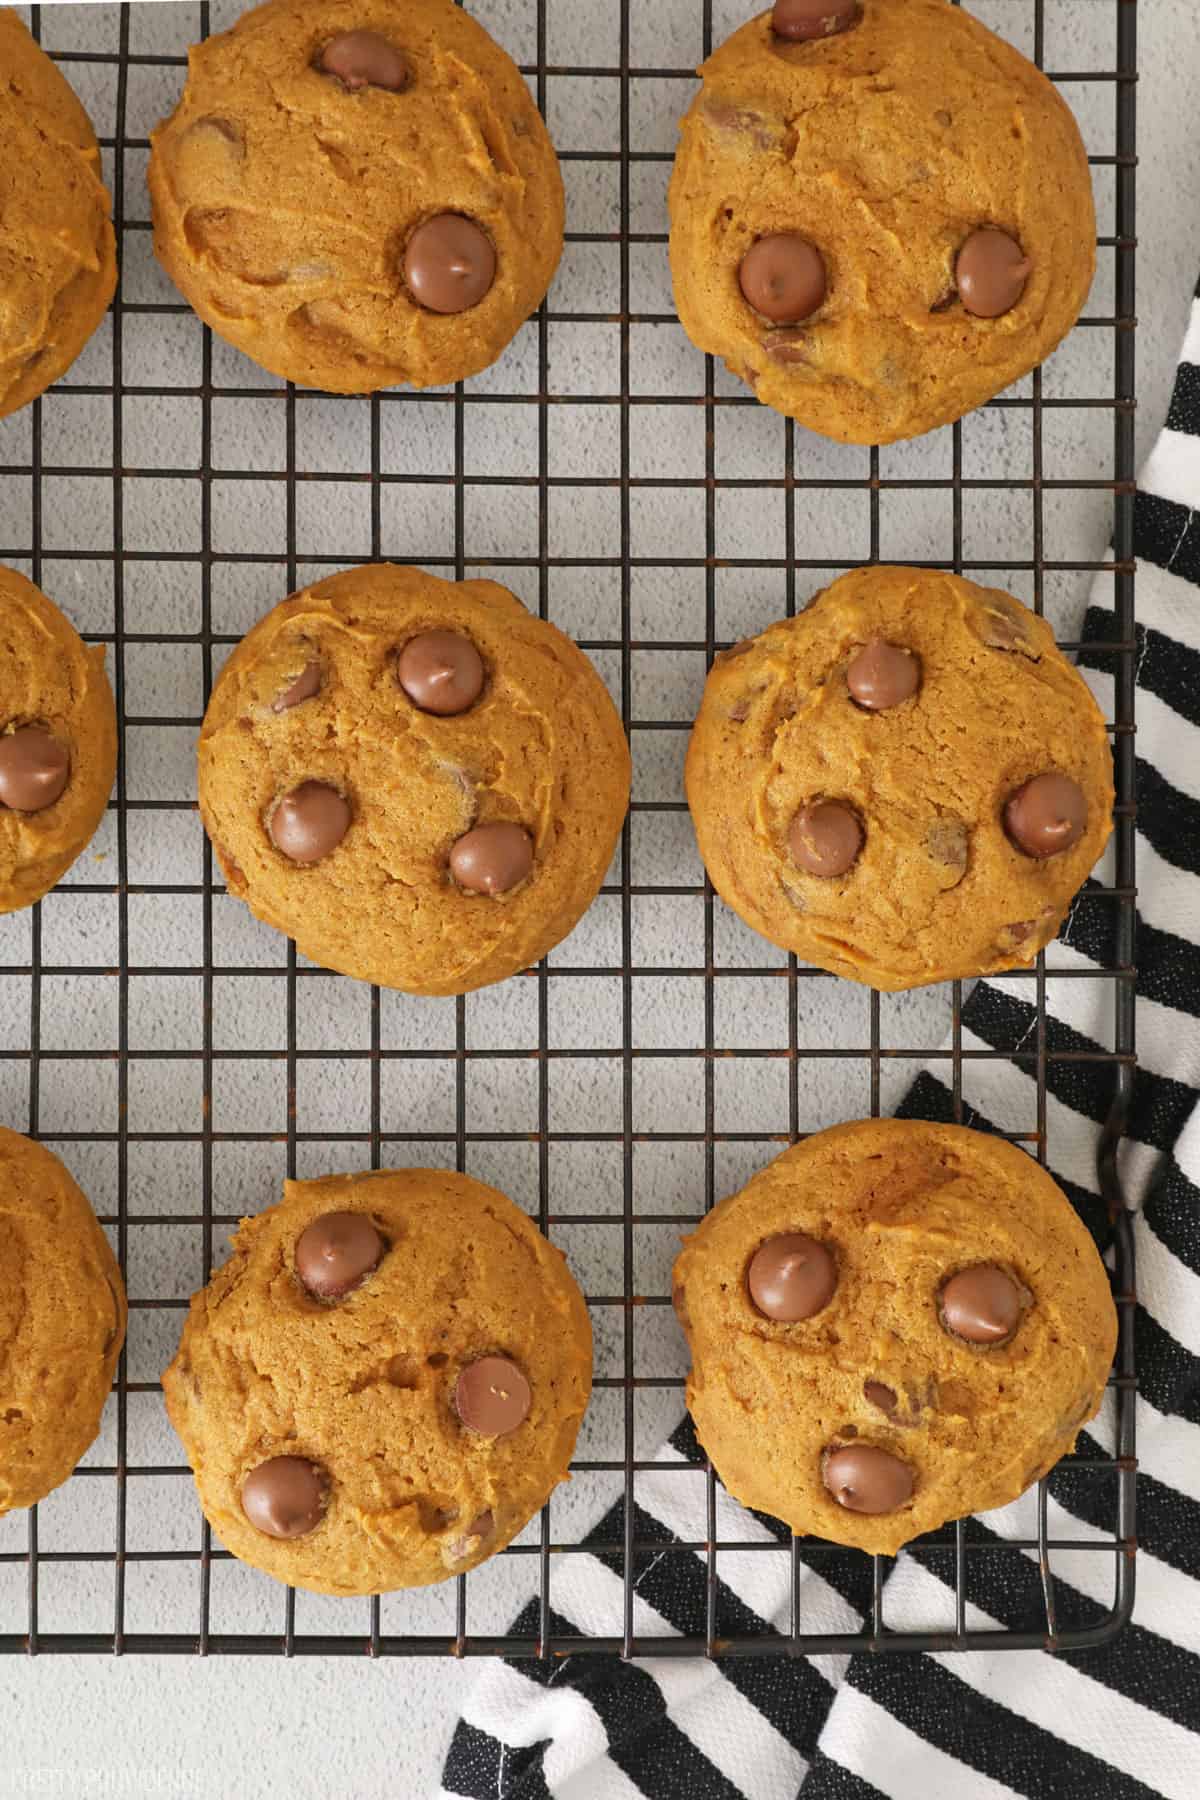 Chocolate chip pumpkin cookies on a cooling rack with a white and black striped towel underneath it.